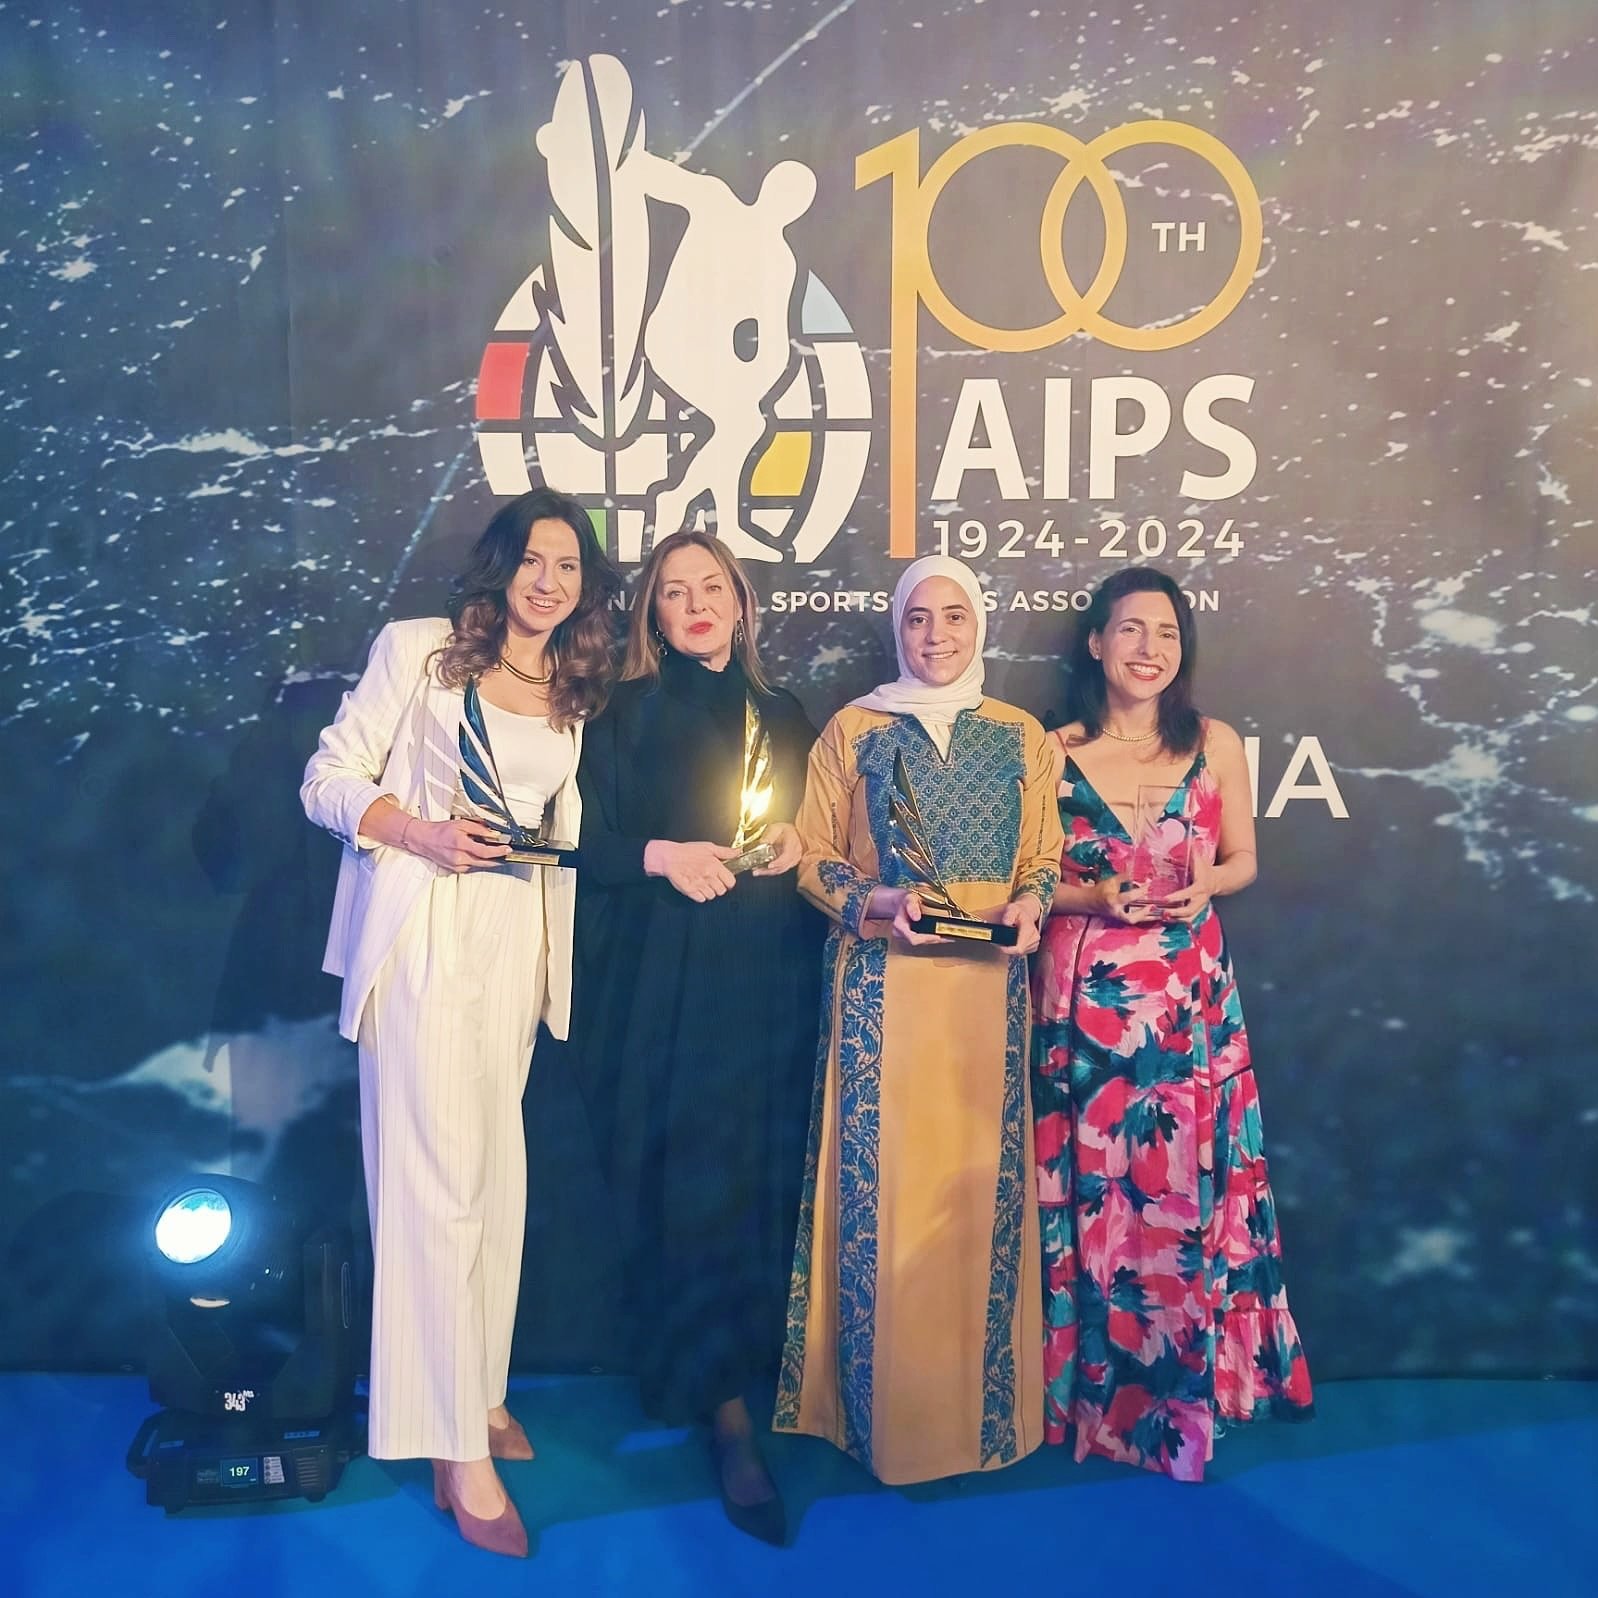 ⭐️☺️ Honoured for CATEGORY:WOMAN to be nominated alongside so many influential sports media journalists &amp; creatives at the @aipsawards @aipsmedia ⭐️ Congrats to the CATEGORY:WOMAN team. #videodocumentary #documentary #aipsawards